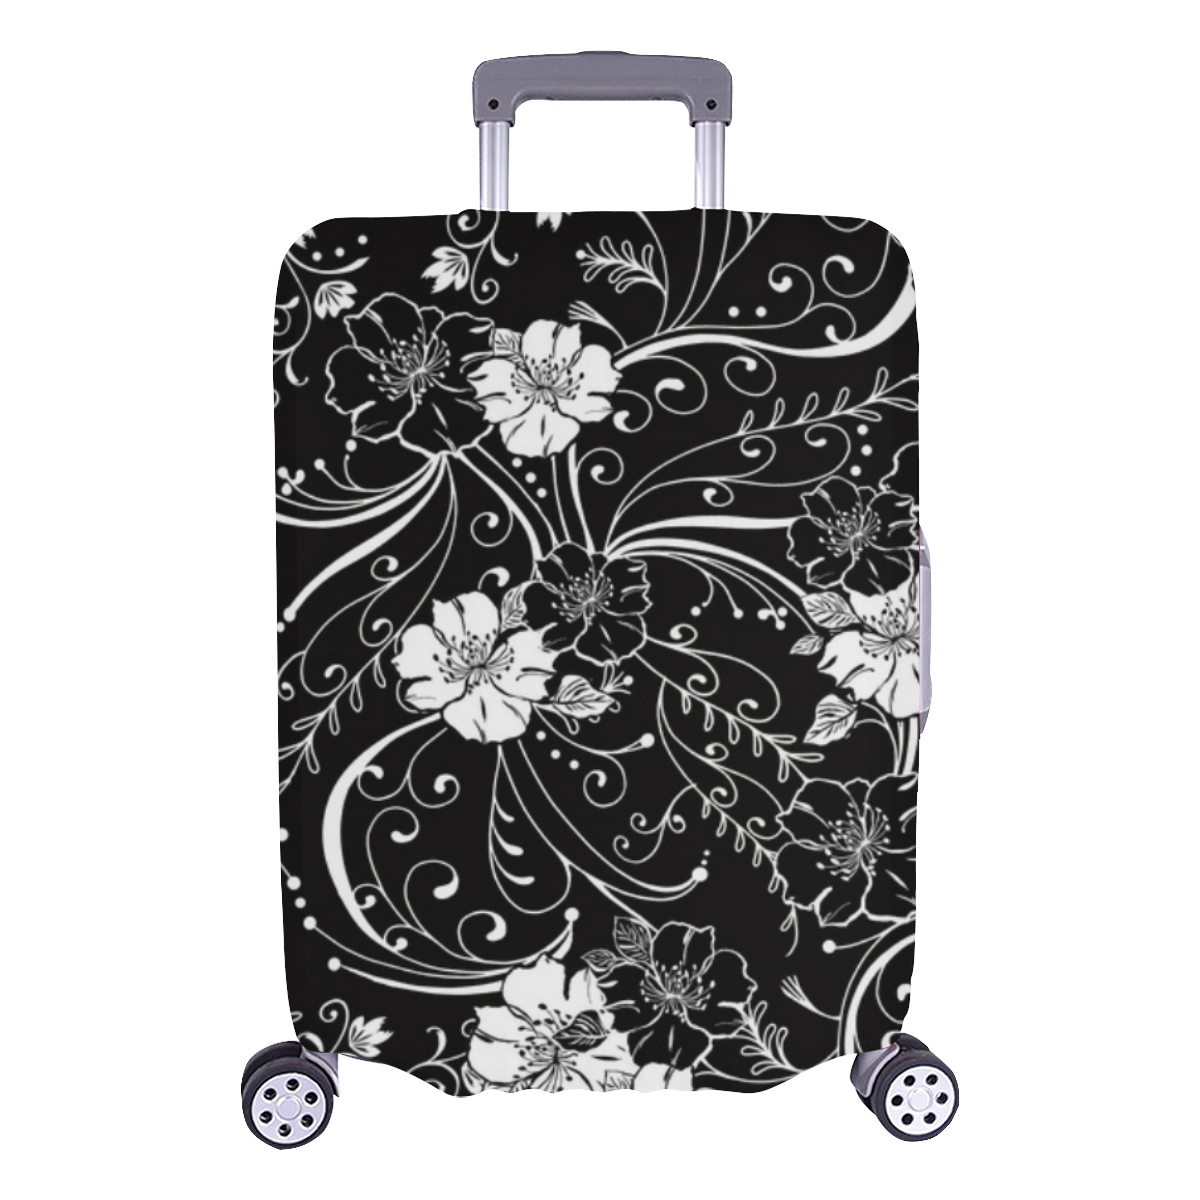 LAVOVO Retro Hummingbird Floral Luggage Cover Suitcase Protector Carry On Covers 